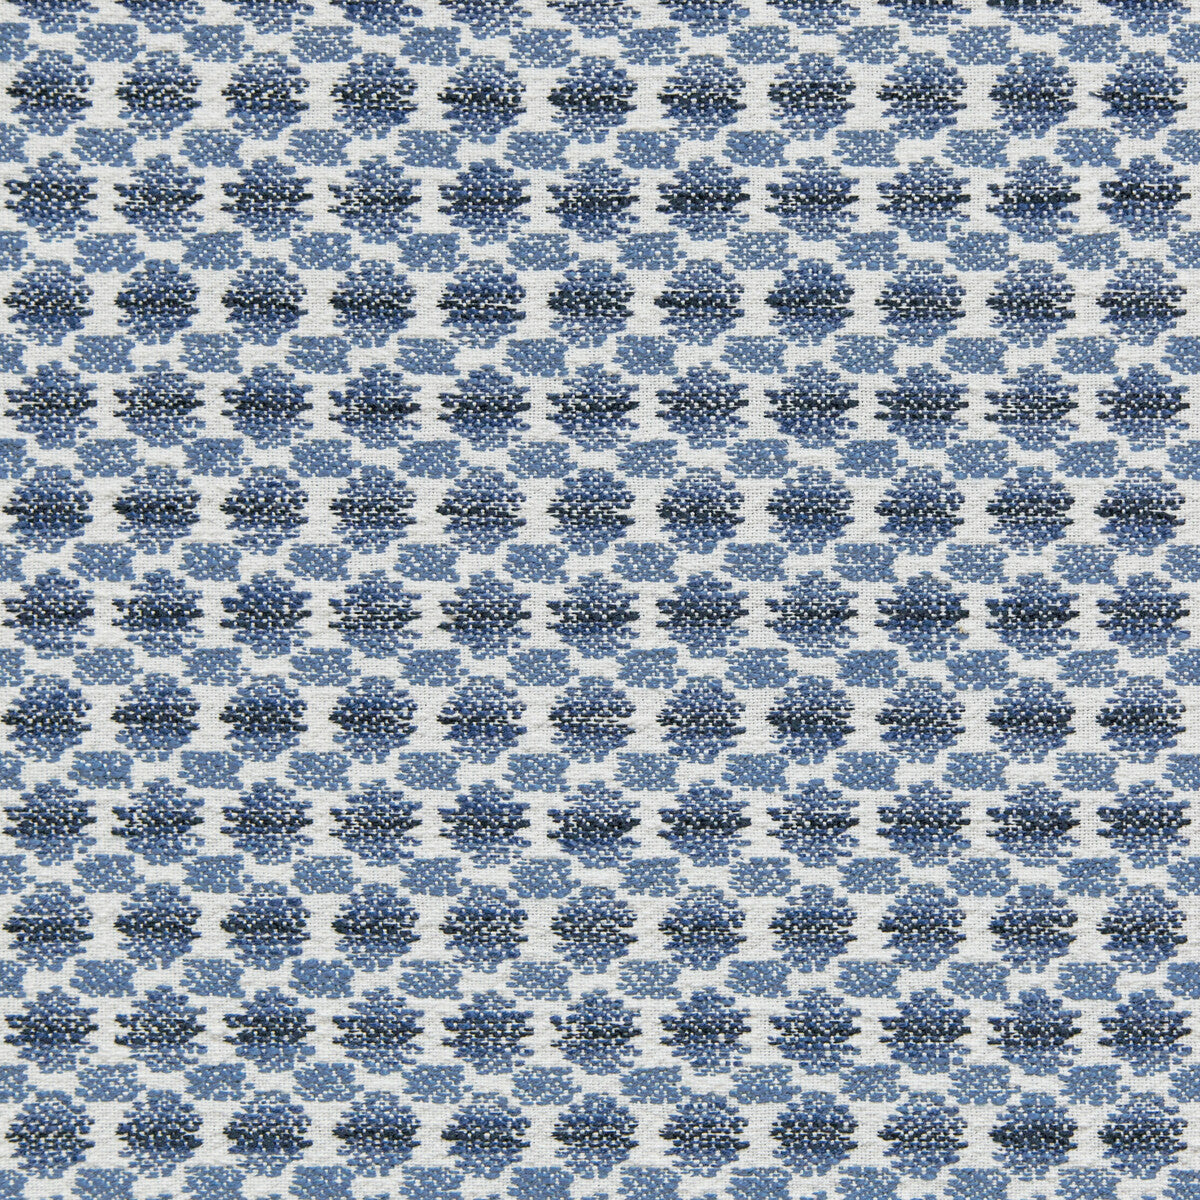 Lancing Weave fabric in blue color - pattern 2020100.5.0 - by Lee Jofa in the Linford Weaves collection